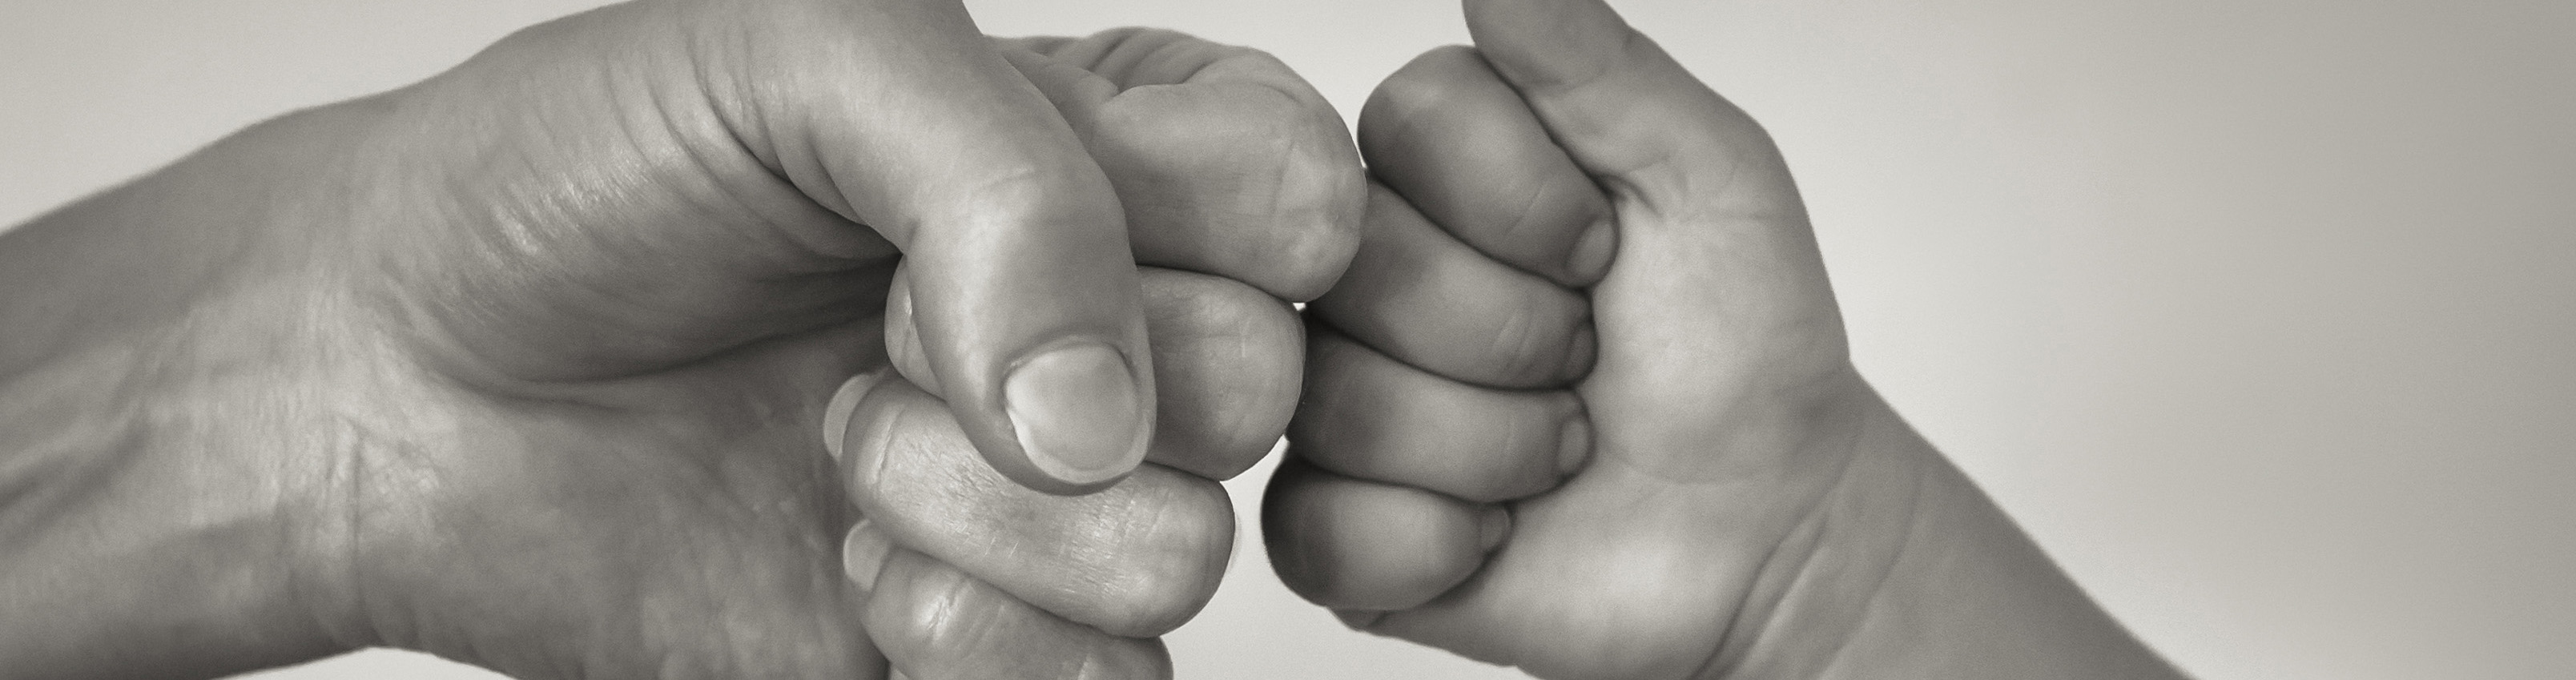 adult hand and child hand fist bump